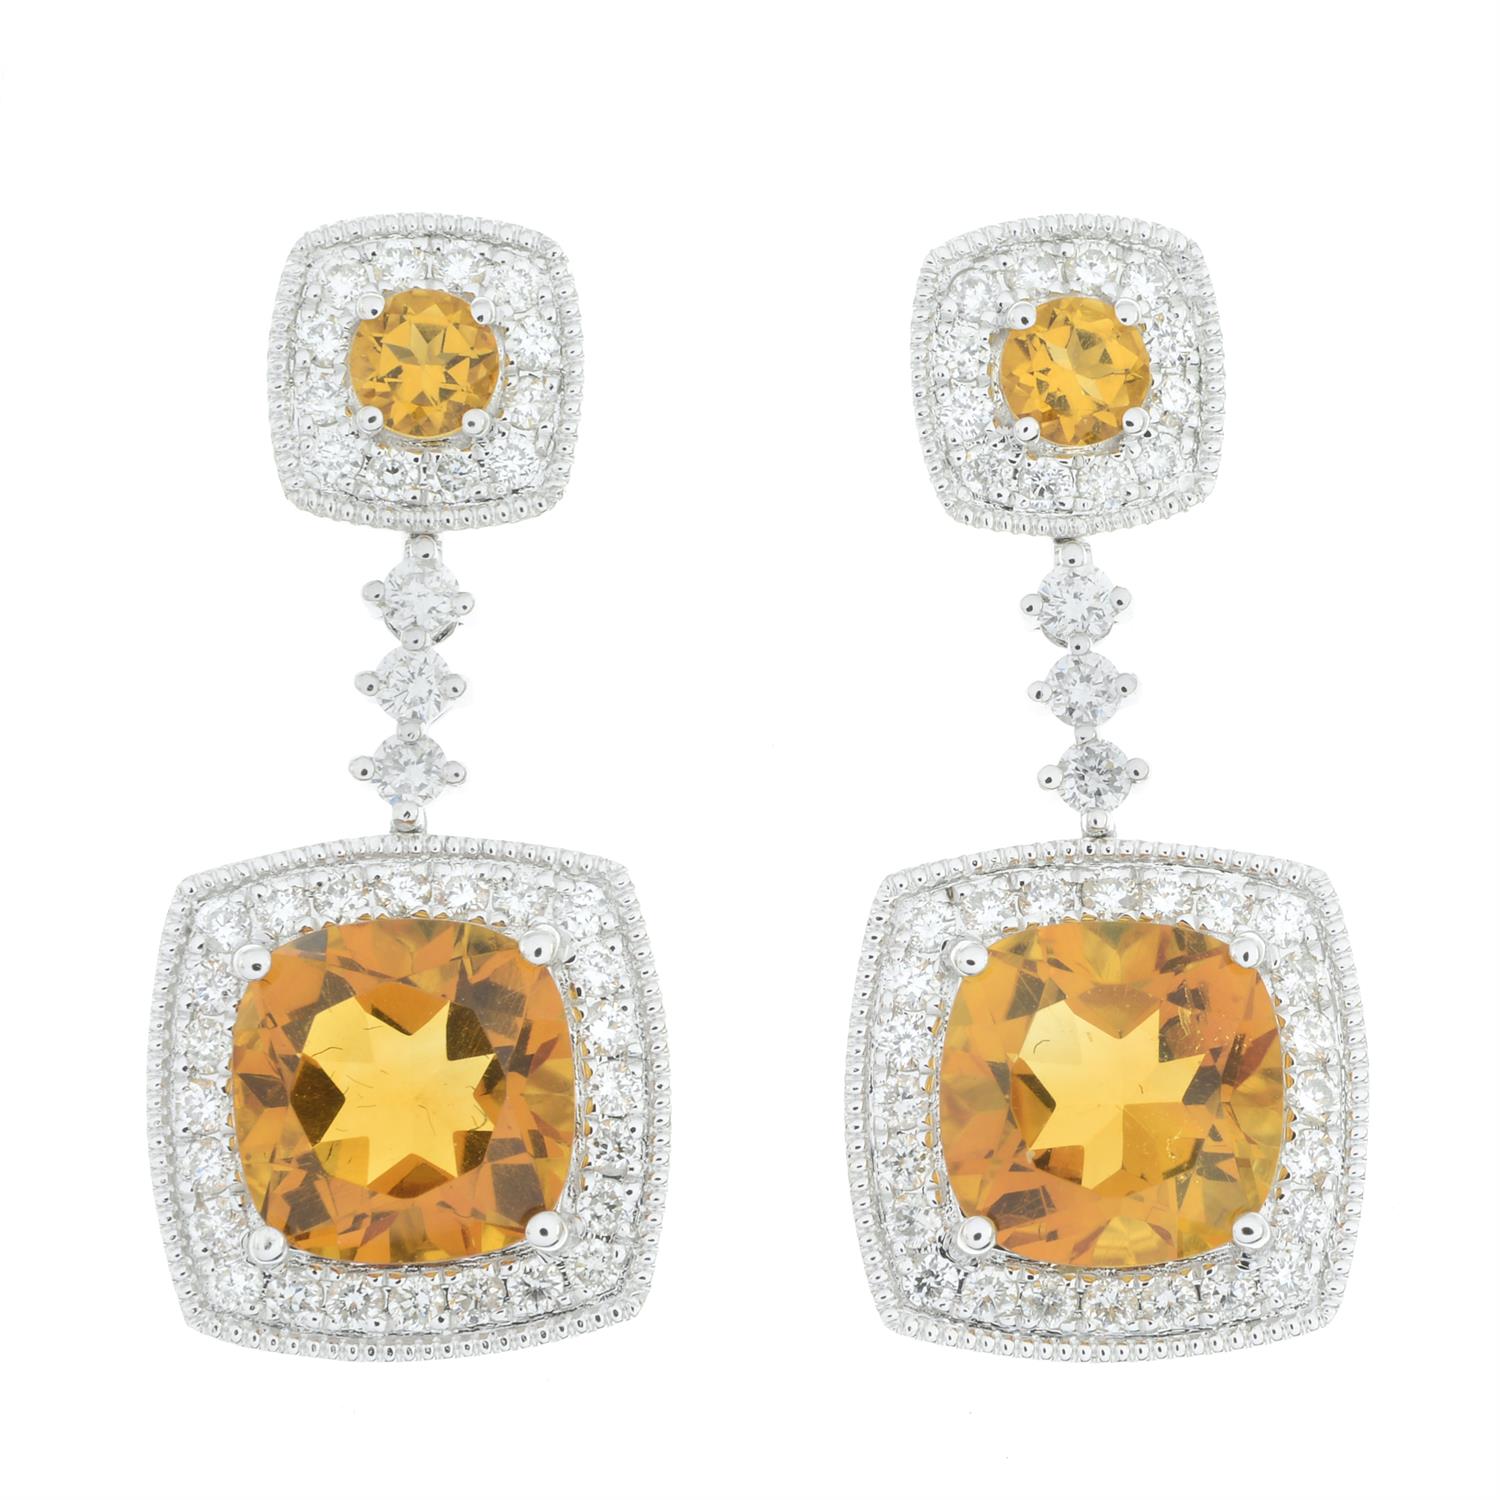 18ct gold citrine and diamond earrings - Image 2 of 4